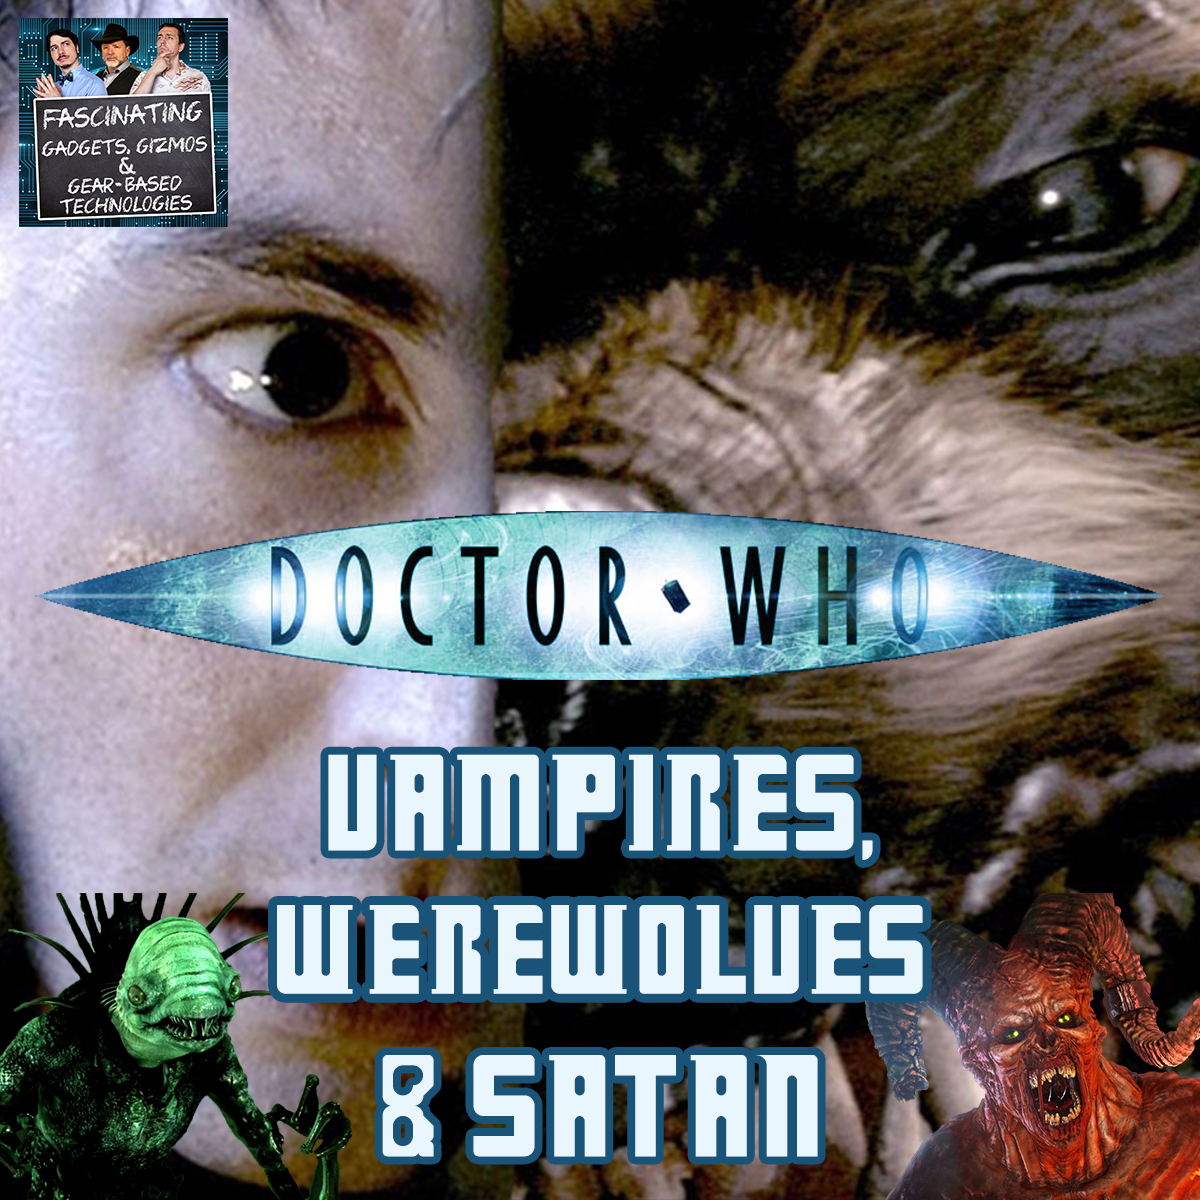 You are currently viewing Ep. 114 The Mythological Creatures of Doctor Who